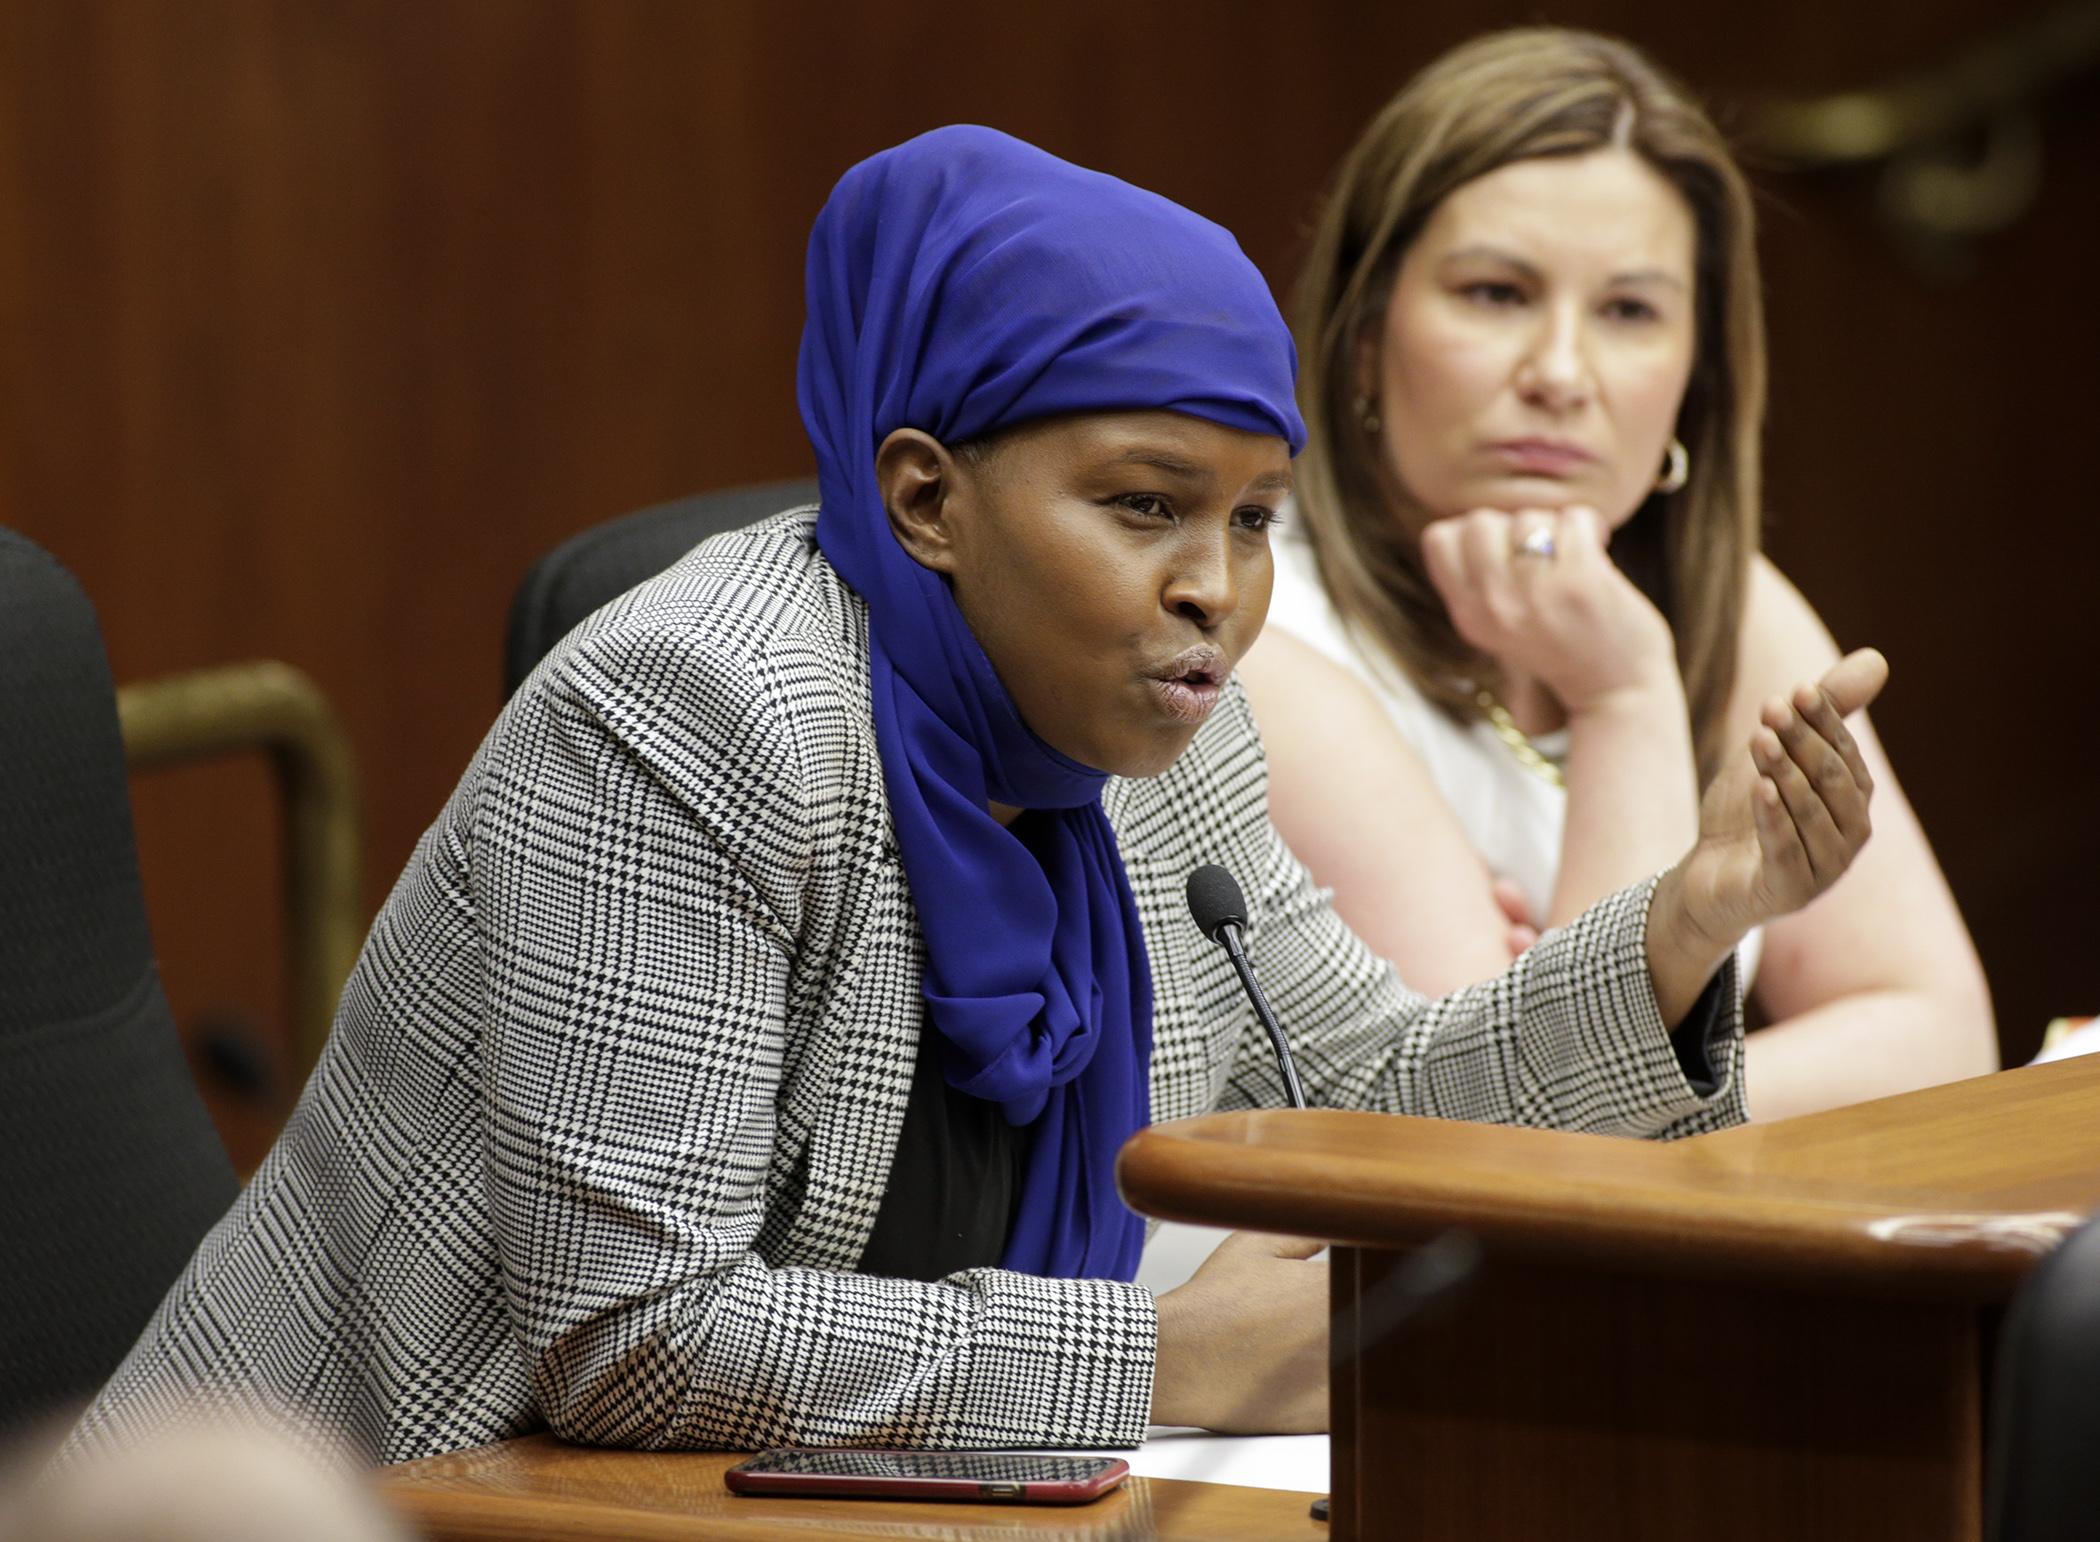 Farhio Klalif responds to a question after providing emotional testimony about her experience as a young girl in Somalia. Klalif shared her story at a May 3 House Civil Law and Data Practices Policy Committee hearing on HF2621, sponsored by Rep. Mary Franson, right. Photo by Paul Battaglia